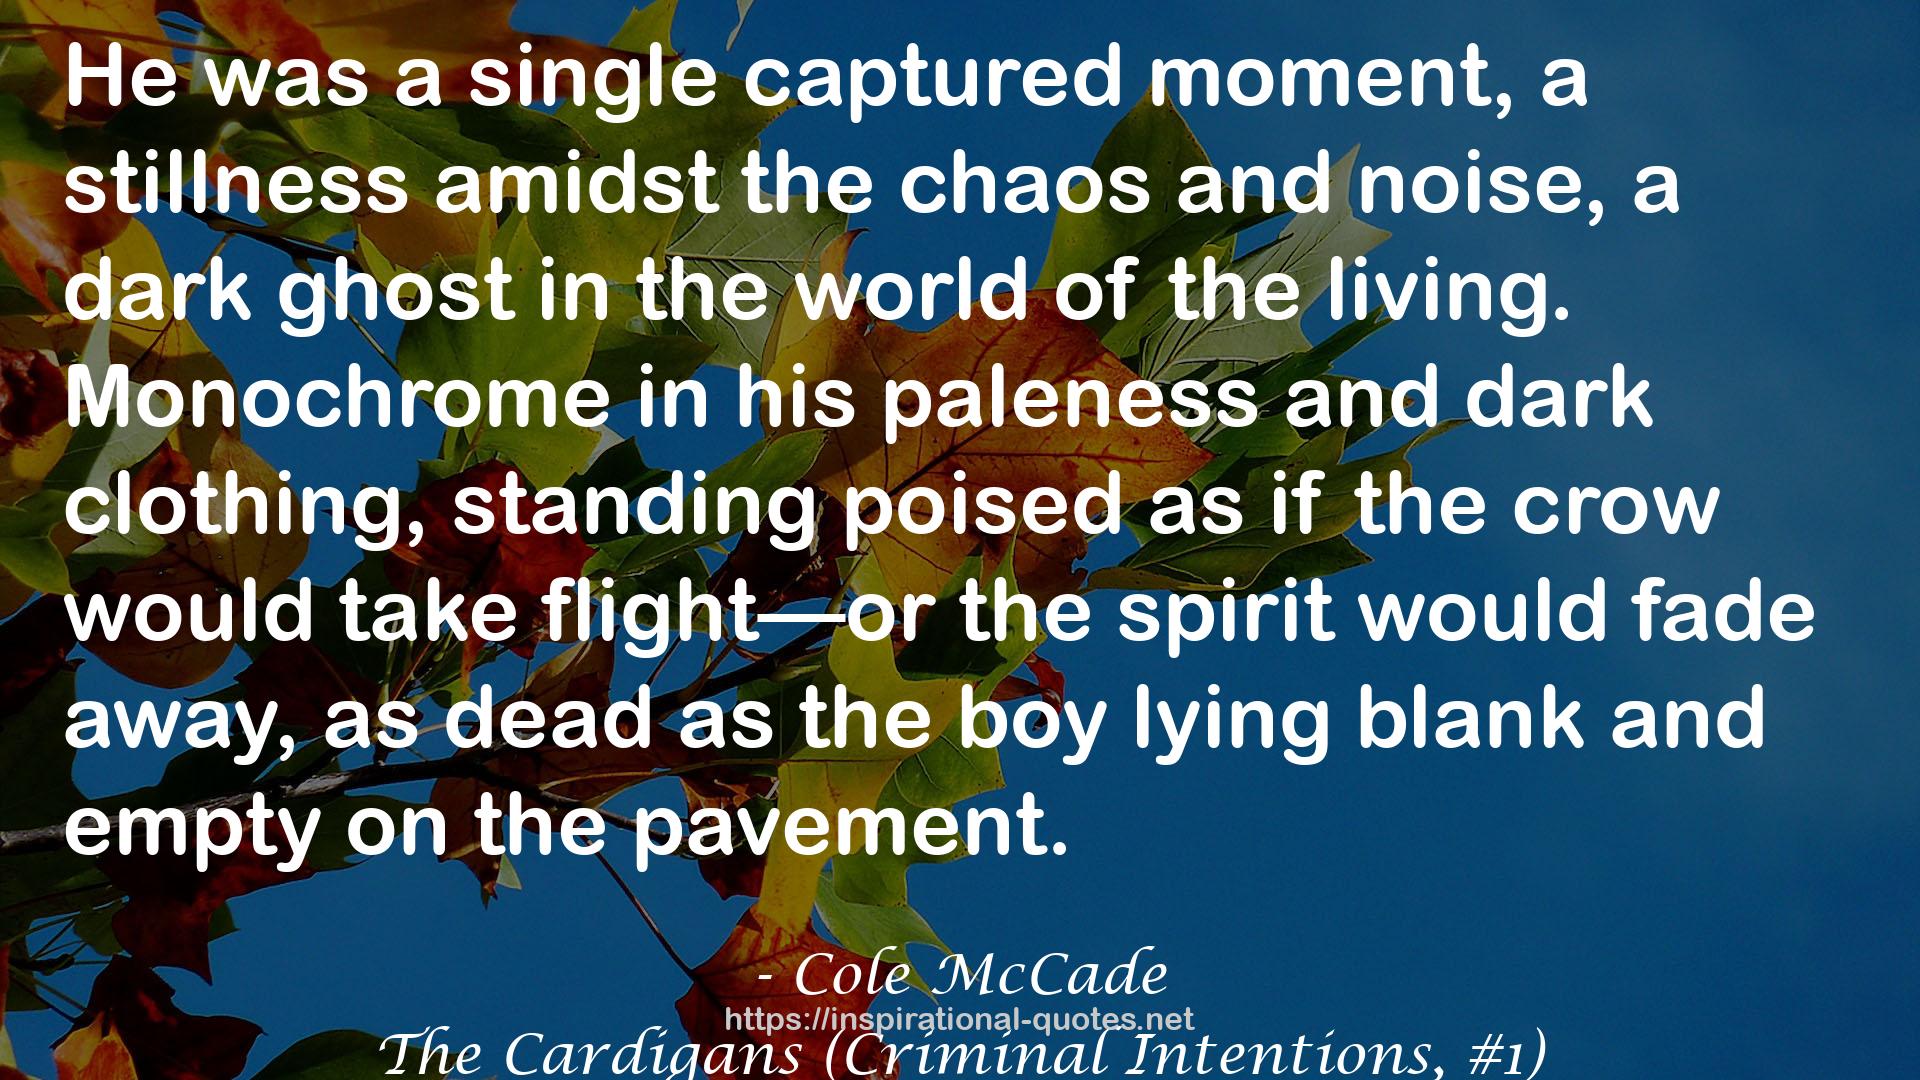 The Cardigans (Criminal Intentions, #1) QUOTES